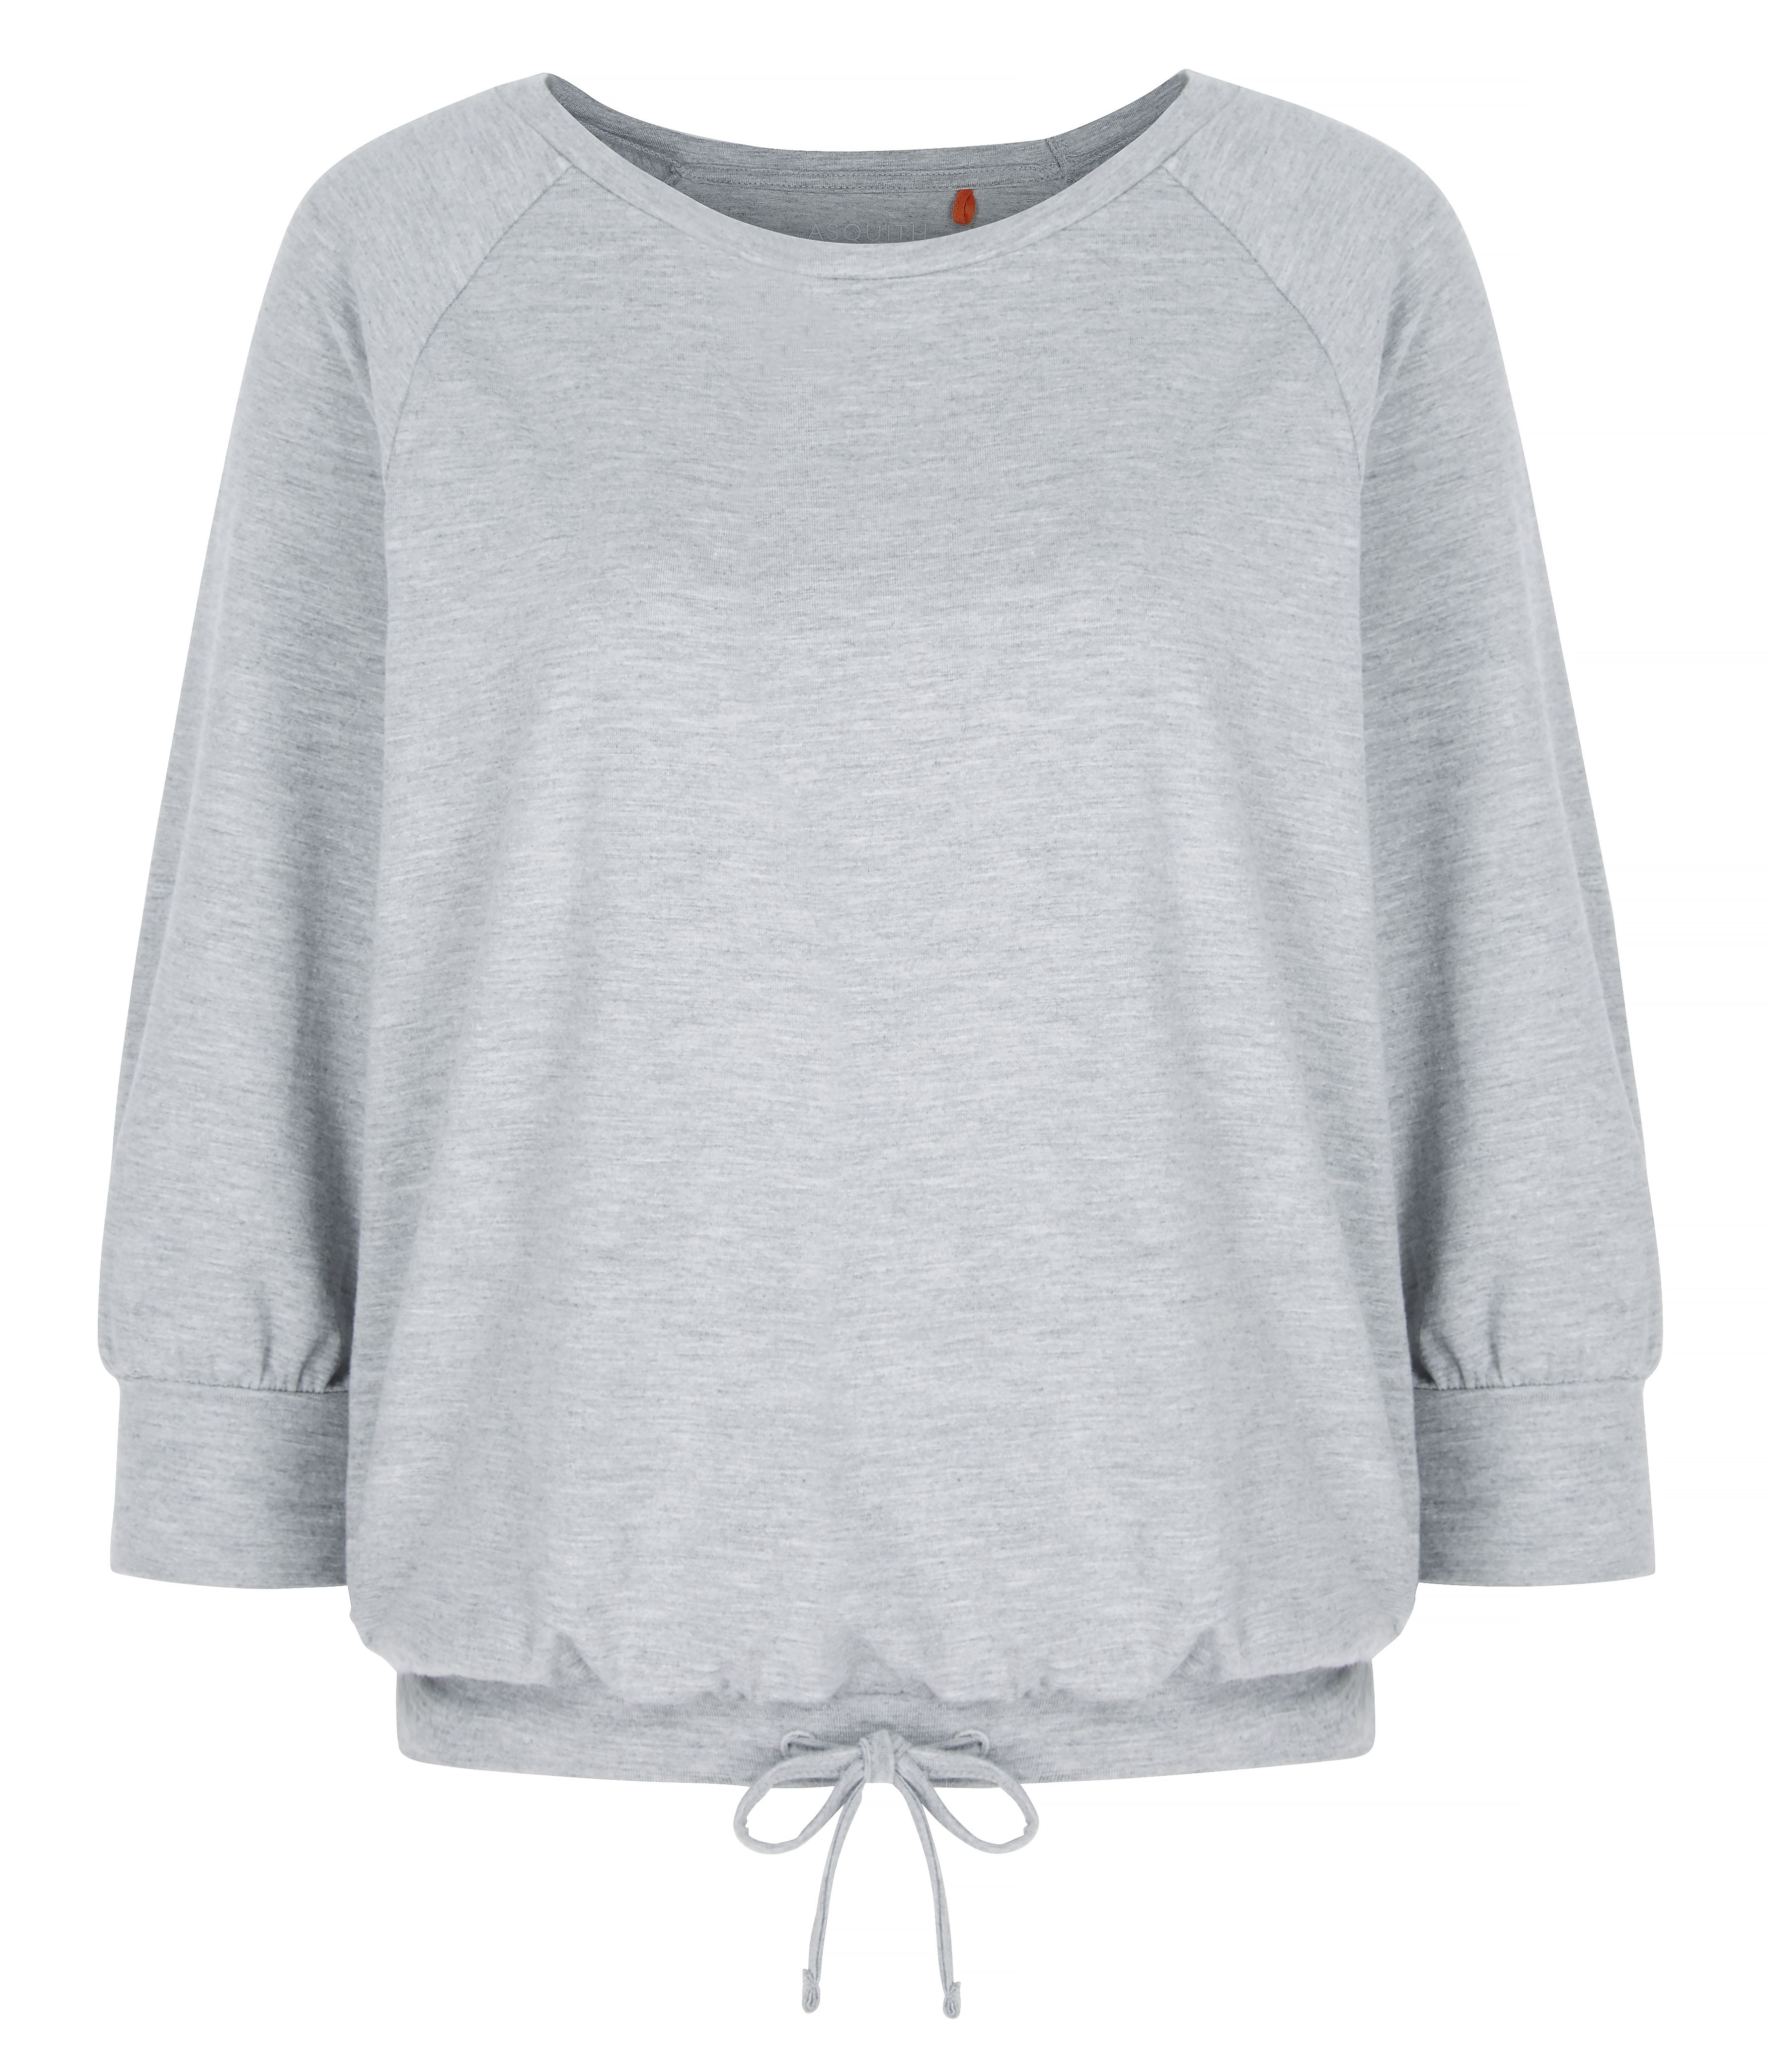 Asquith Embrace Tee - Pale Grey Marl